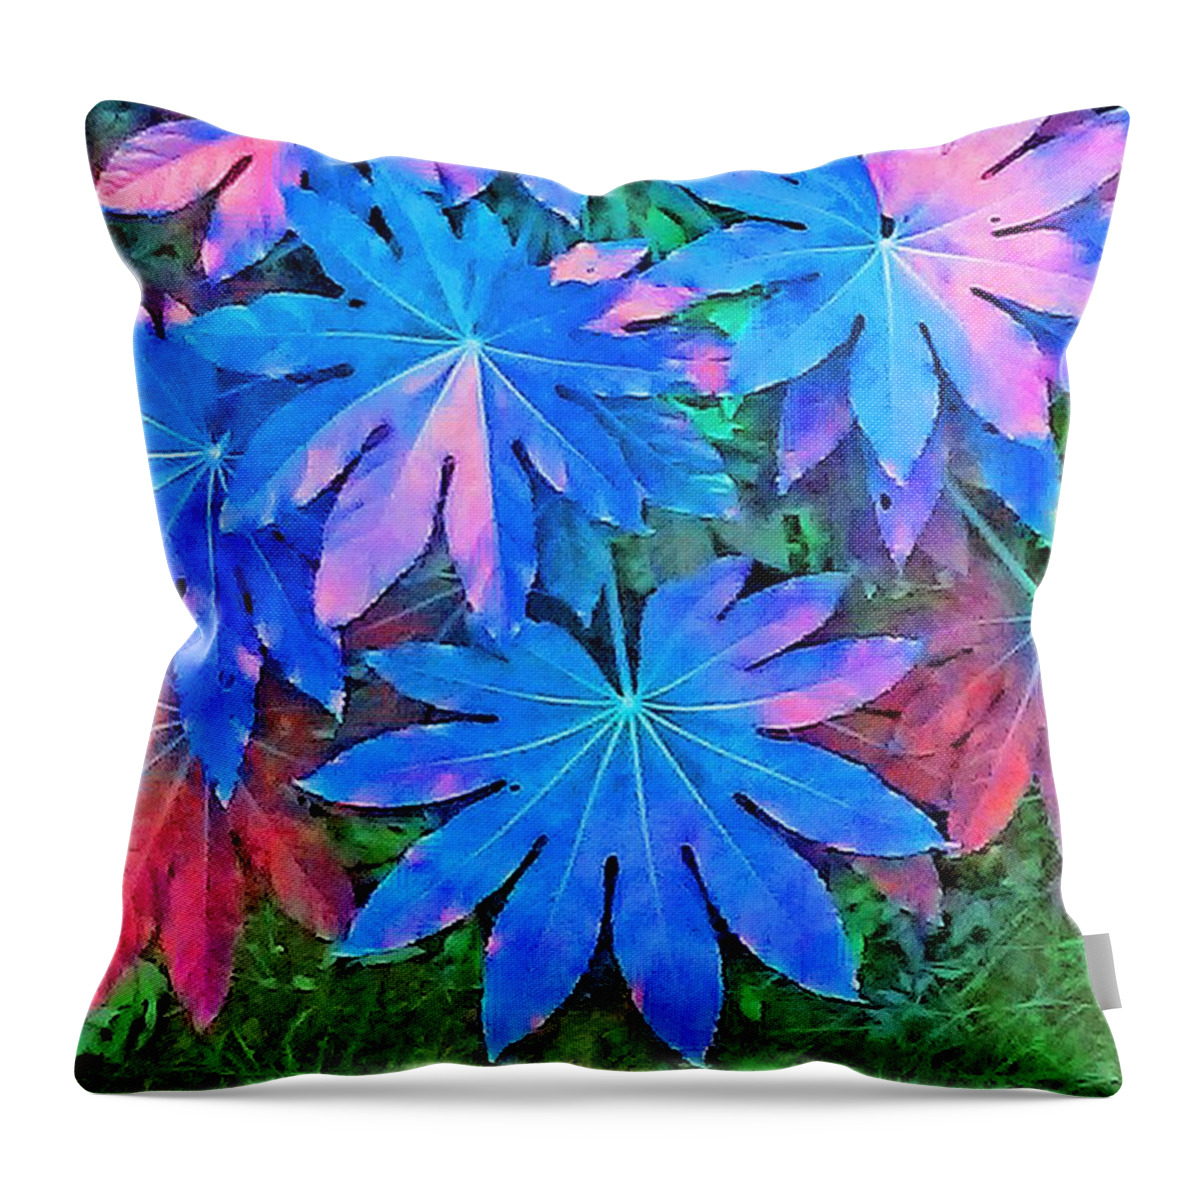 Leaves Throw Pillow featuring the photograph Leaves From Above by Andrew Lawrence